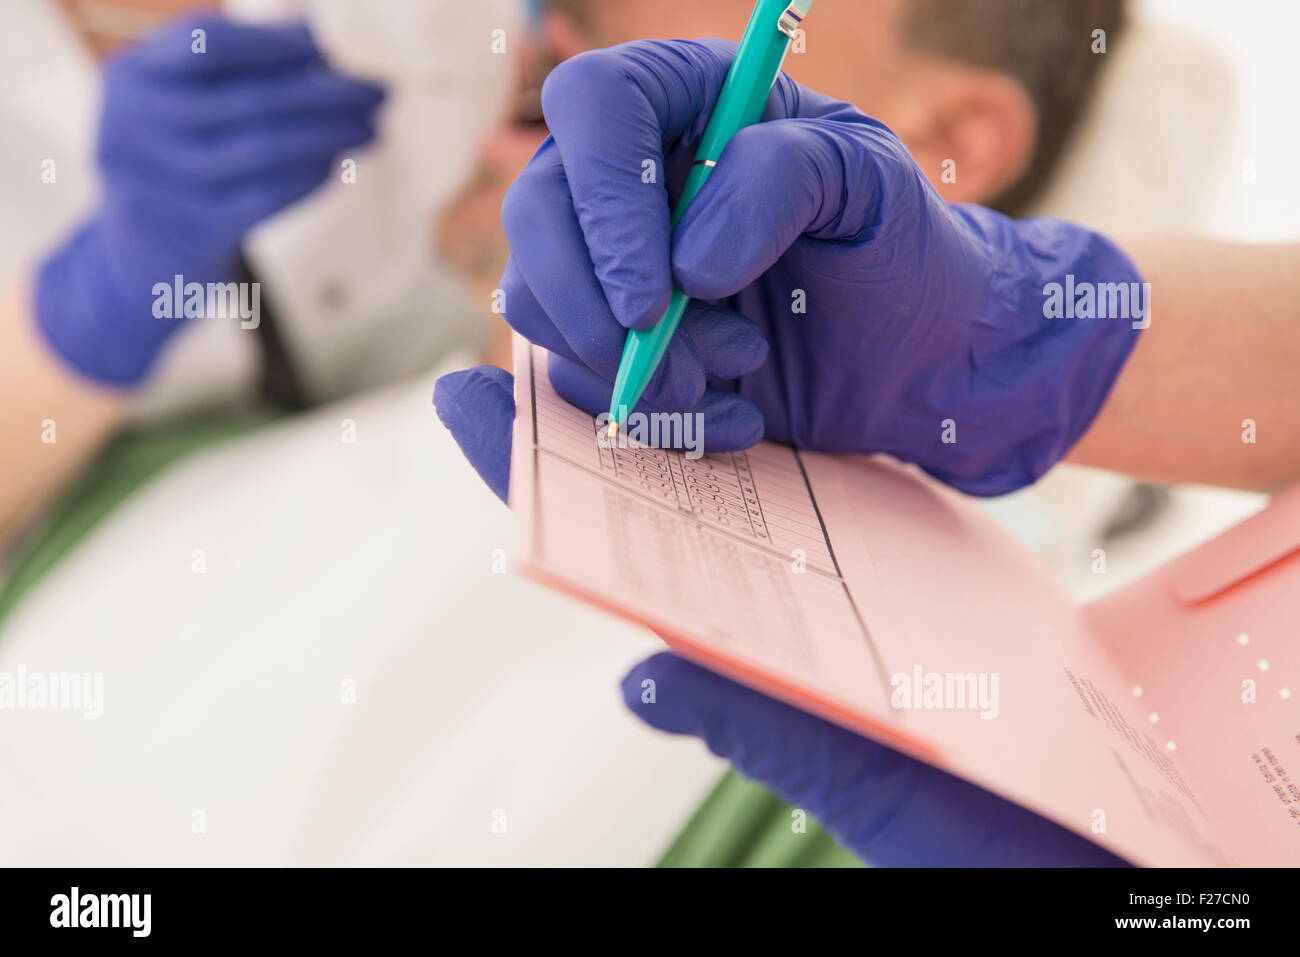 Dental assistant writing on index card, Munich, Bavaria, Germany Stock Photo